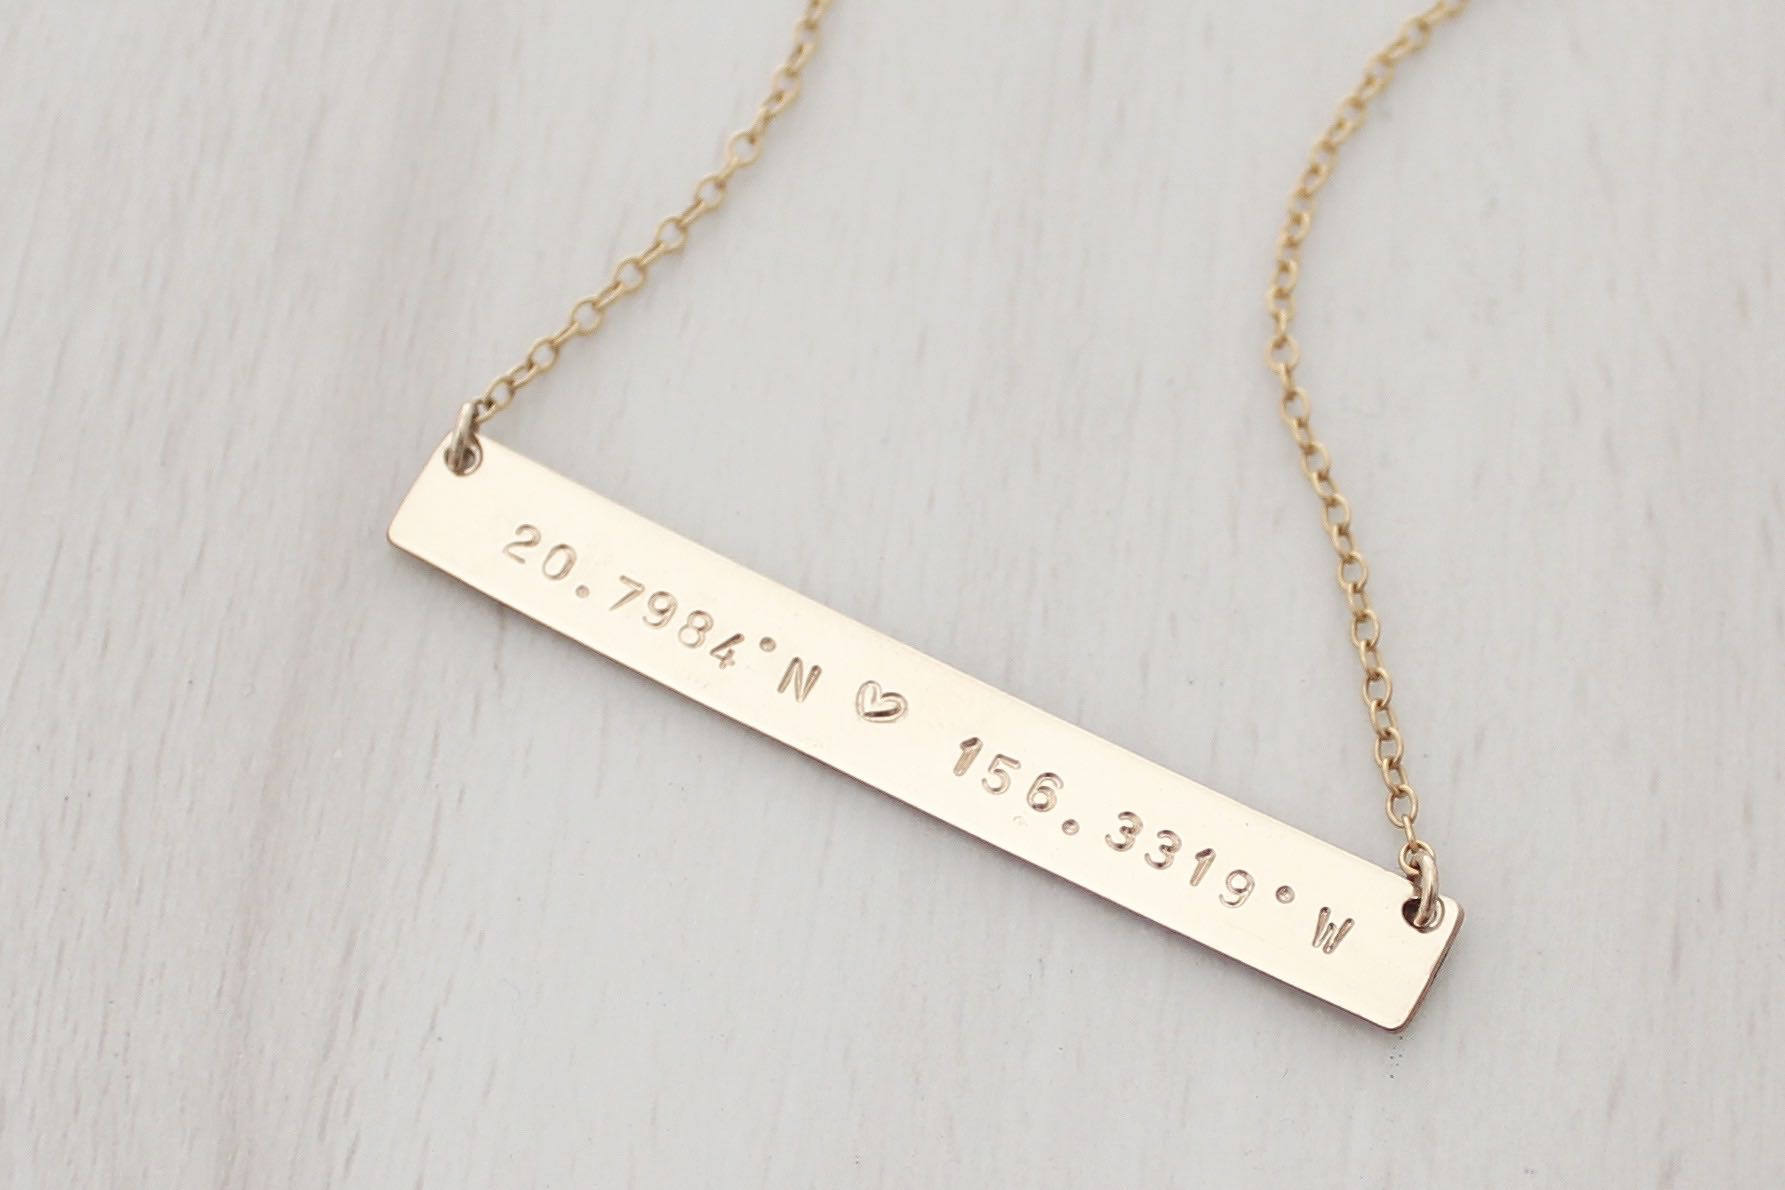 gold bar necklace